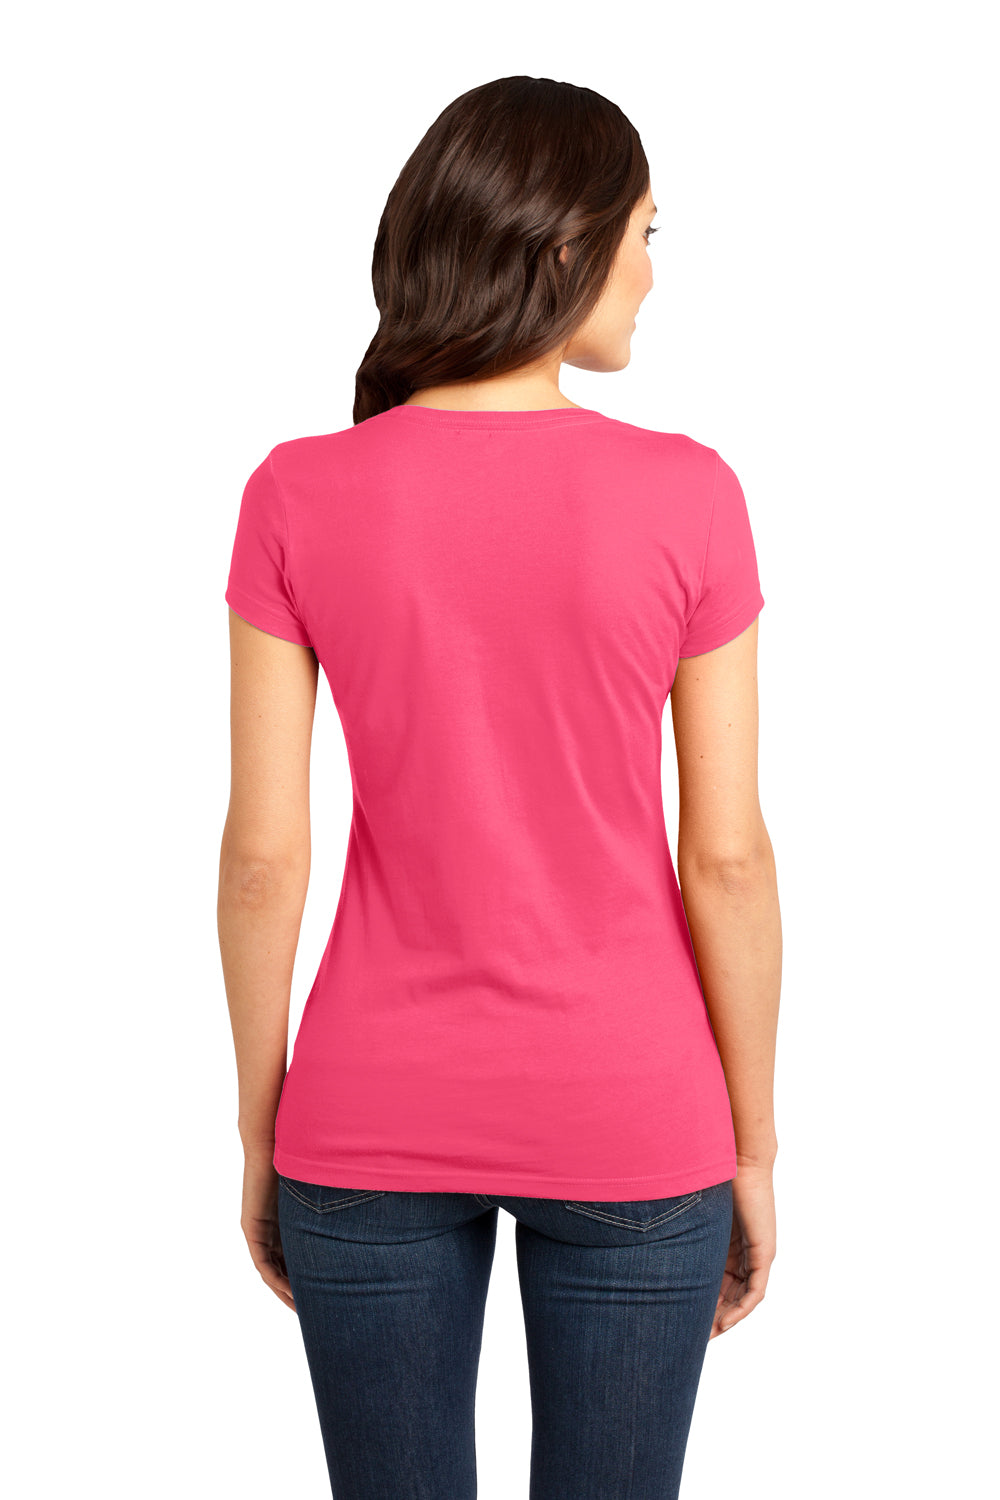 District DT6001 Womens Very Important Short Sleeve Crewneck T-Shirt Neon Pink Back